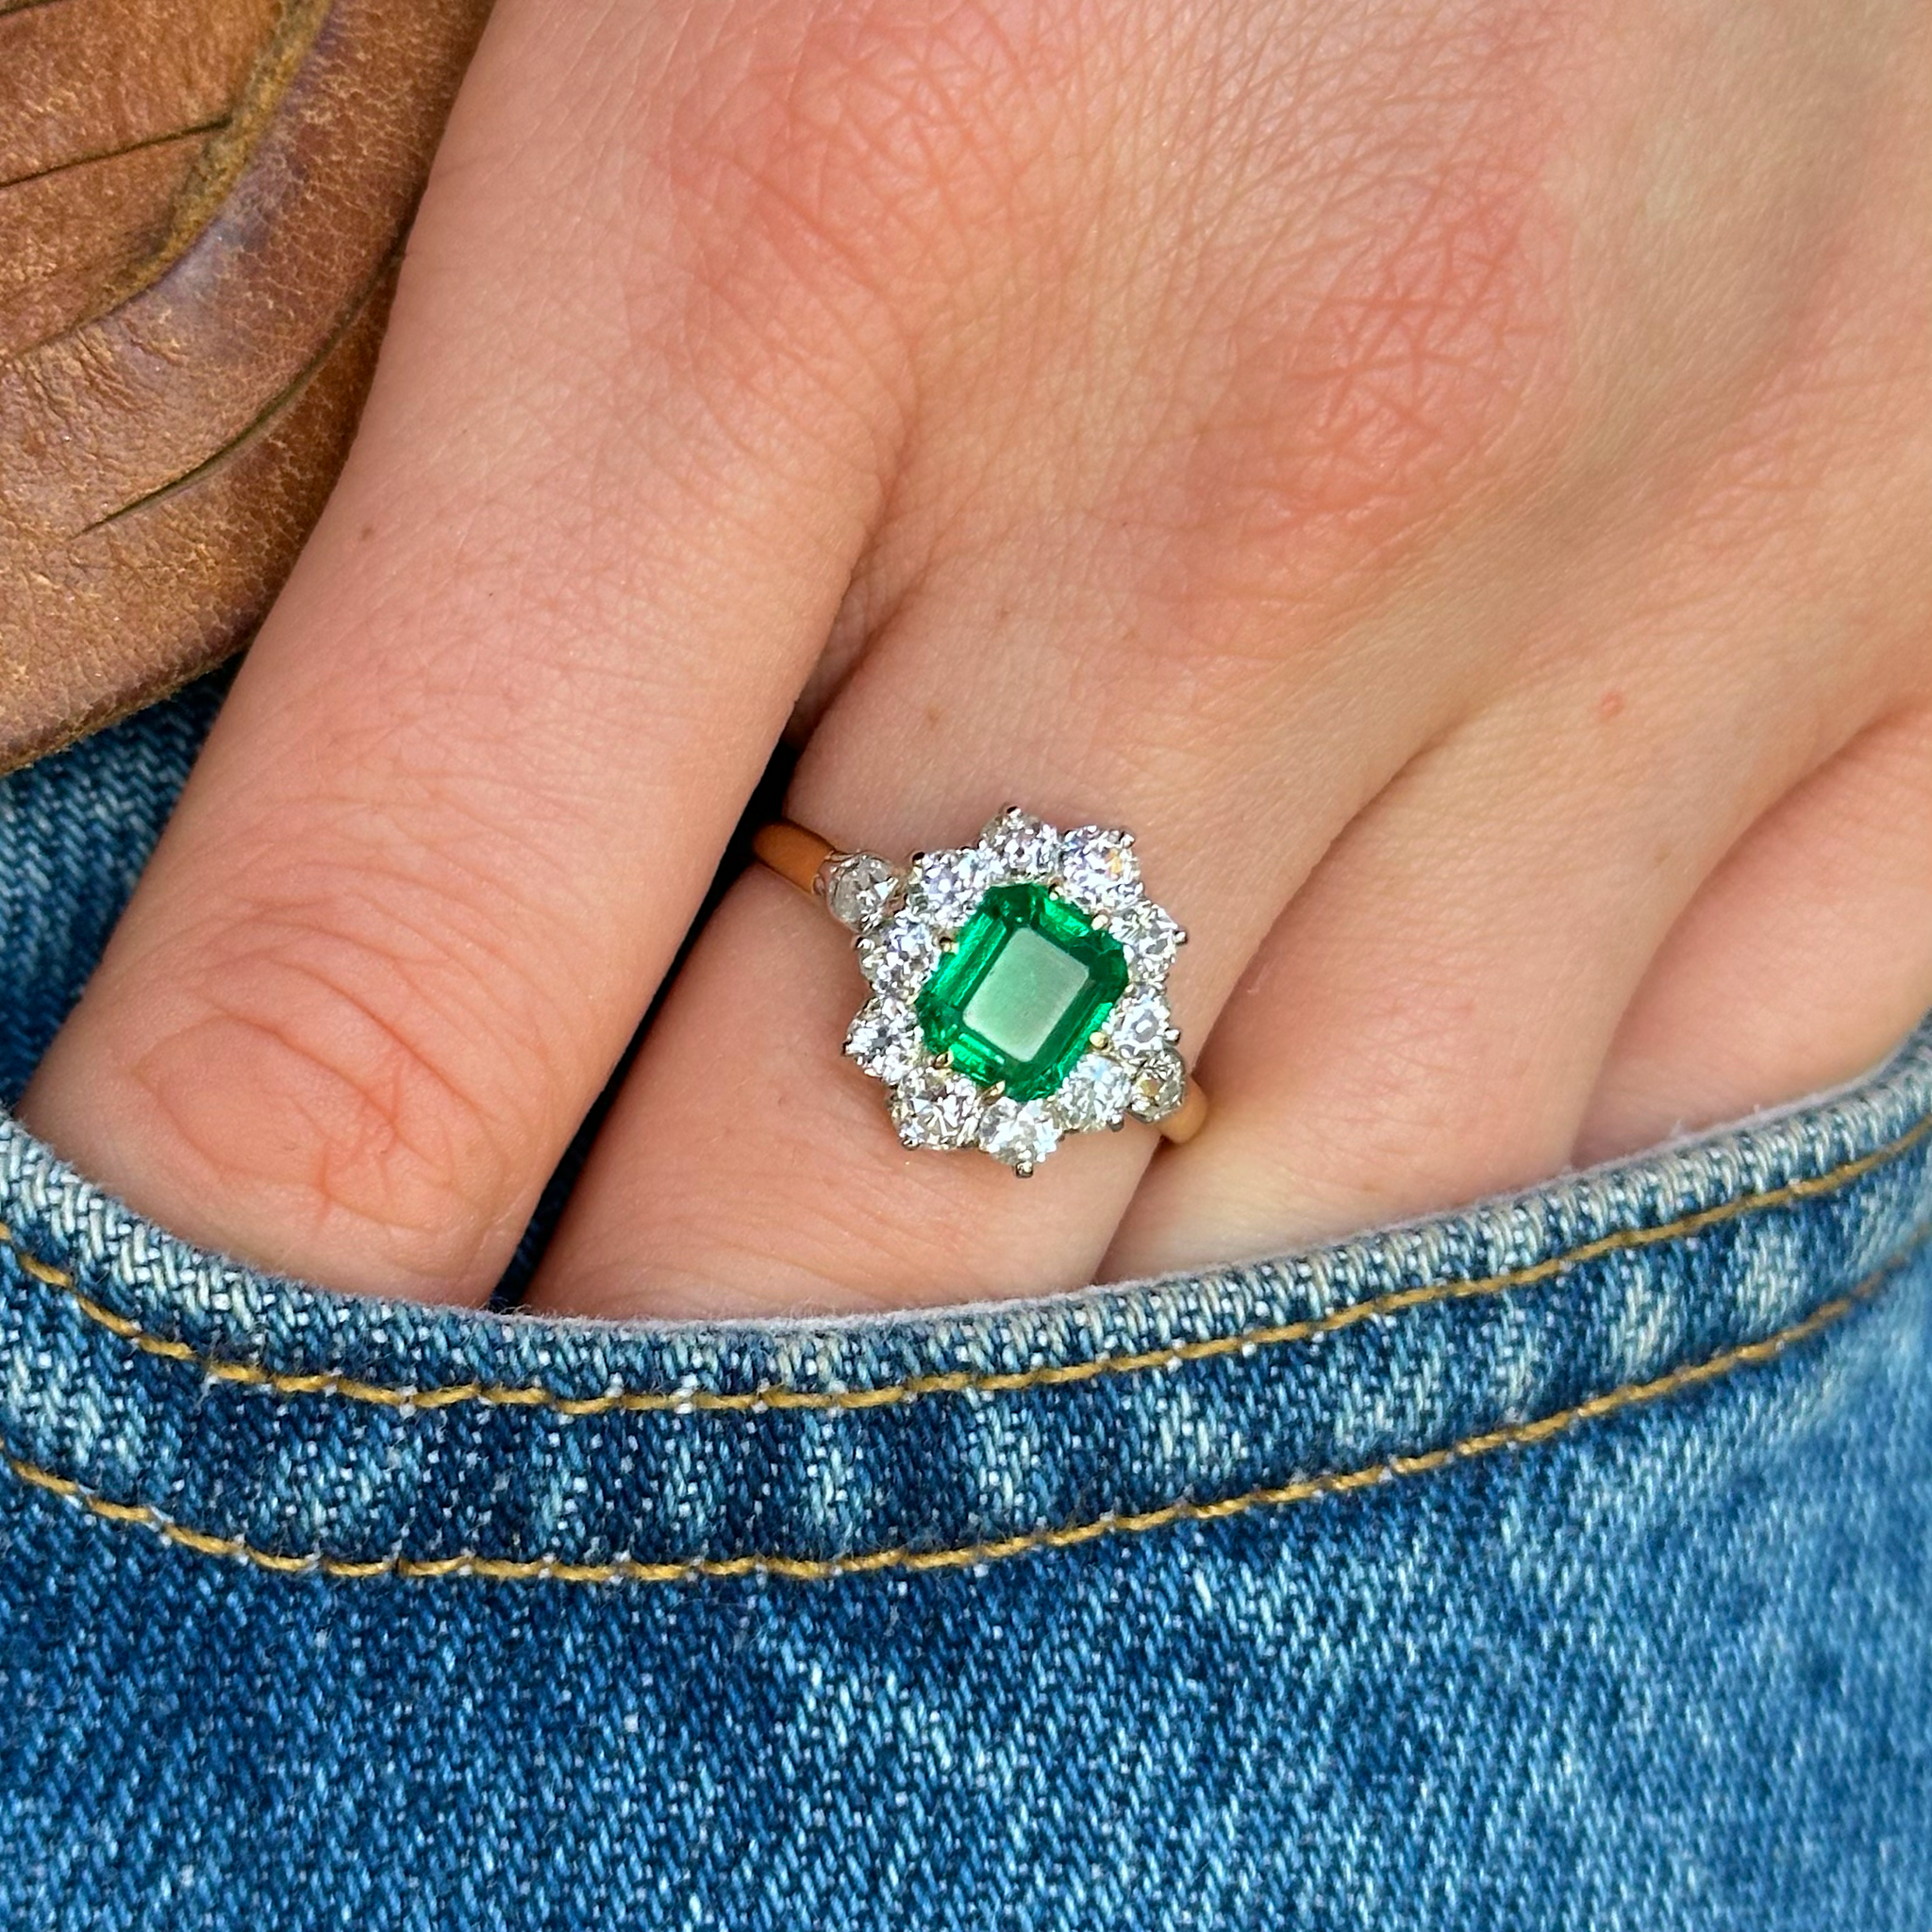 Antique, Edwardian Emerald and Diamond Engagement Ring, 18ct Yellow Gold and Platinum worn on hand in pocket of jeans